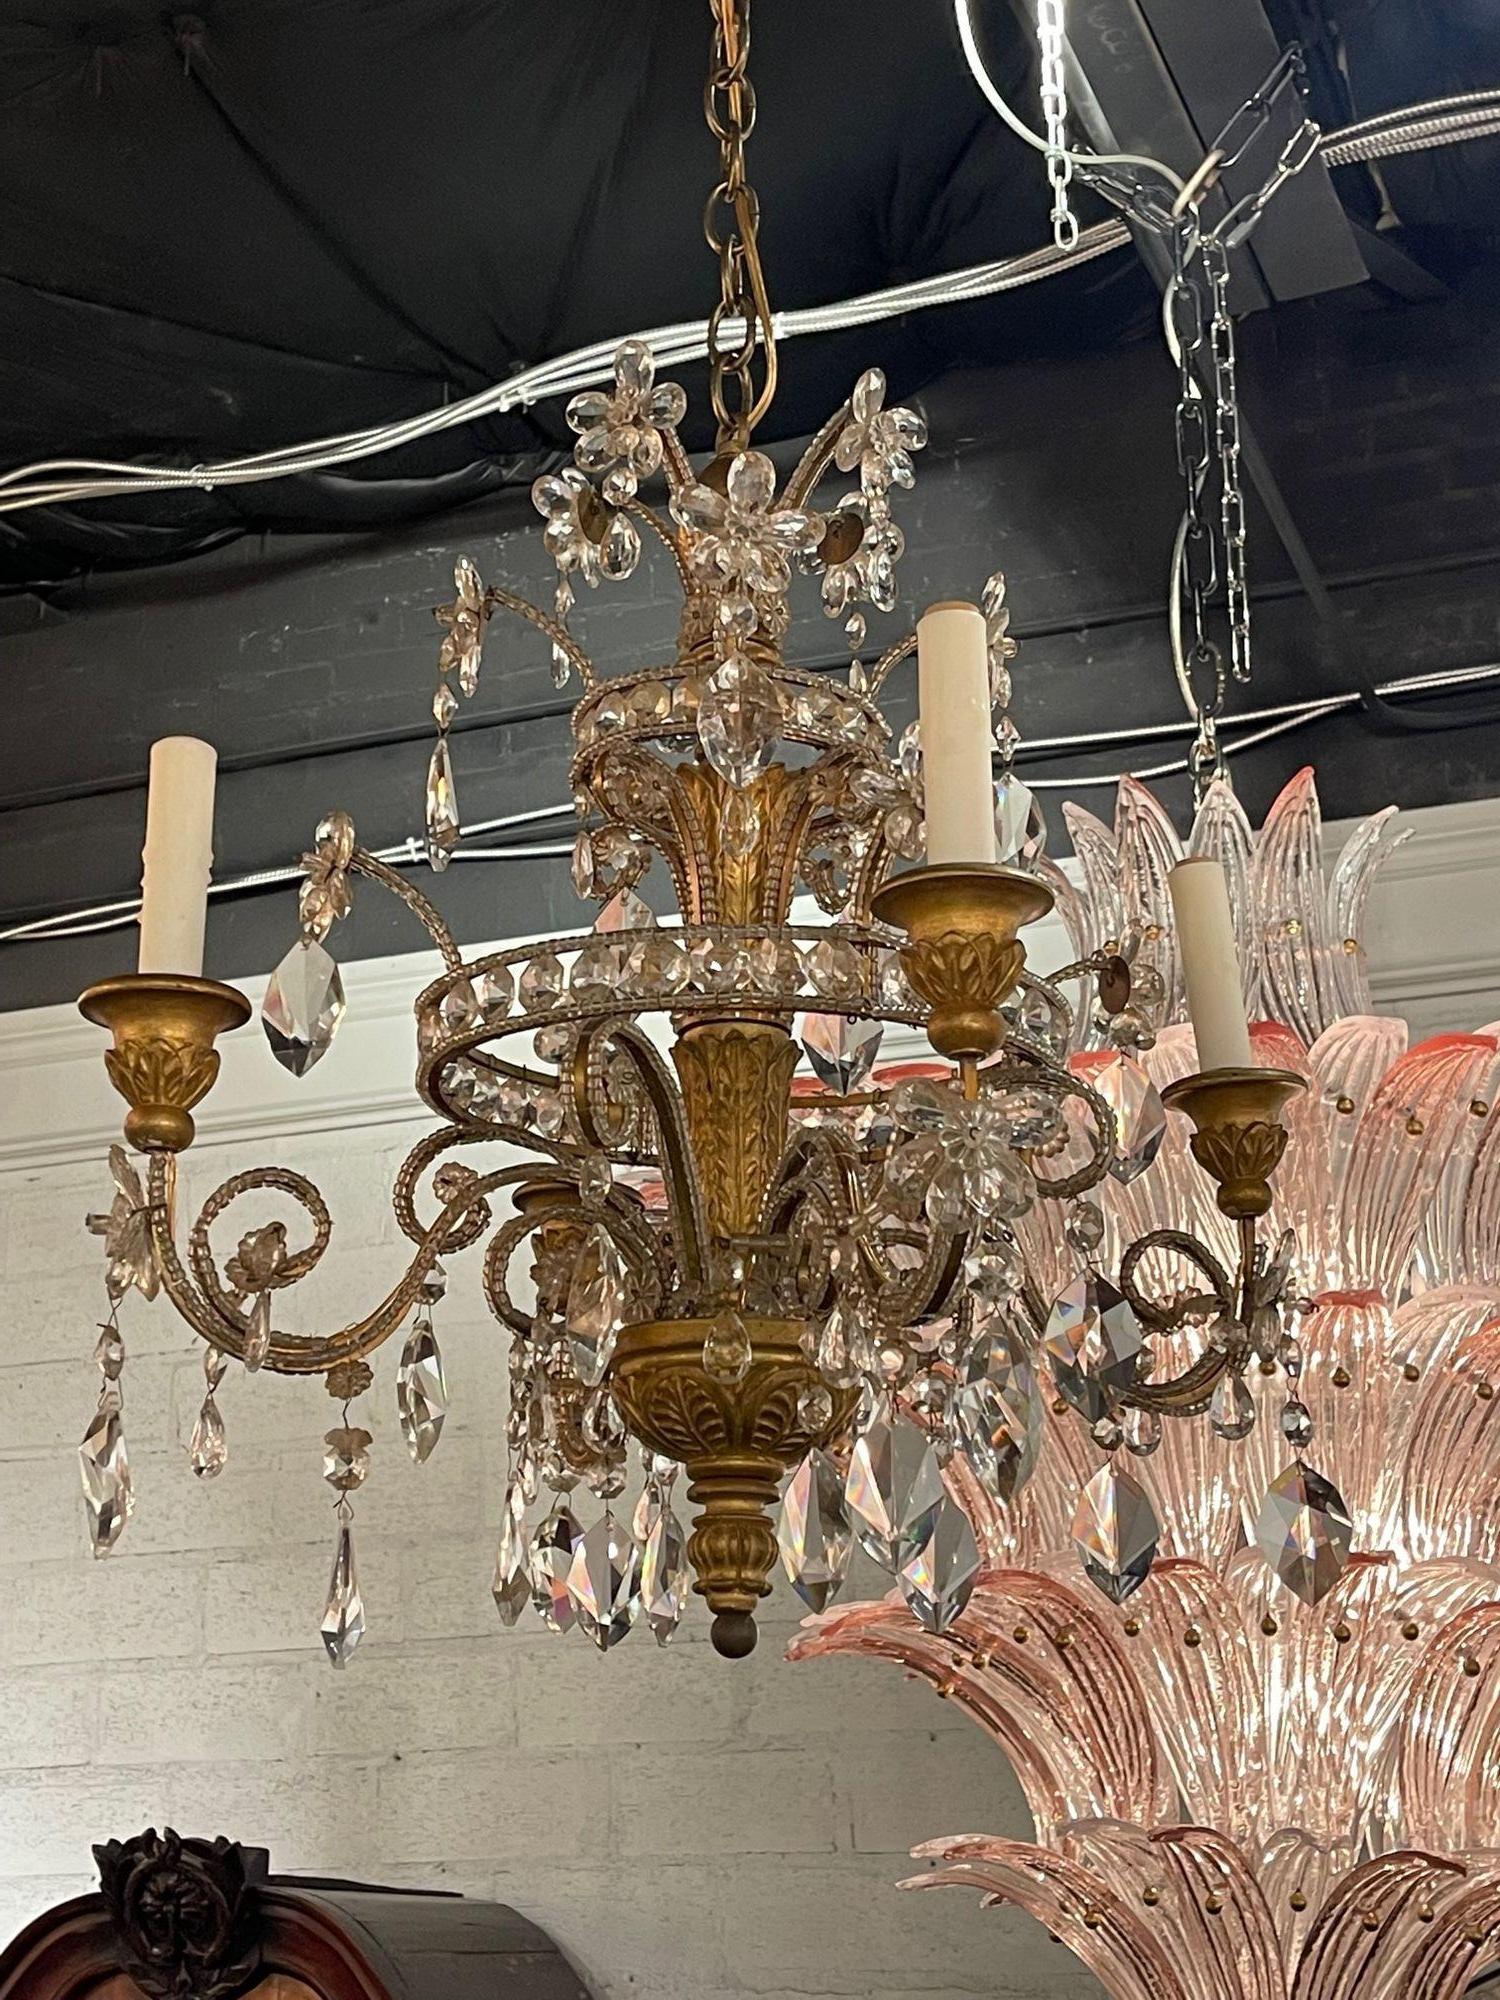 Early 20th century petite Italian giltwood and crystal 4-light chandelier. Circa 1920. The chandelier has been professionally re-wired, cleaned and is ready to hang. Includes matching chain and canopy.